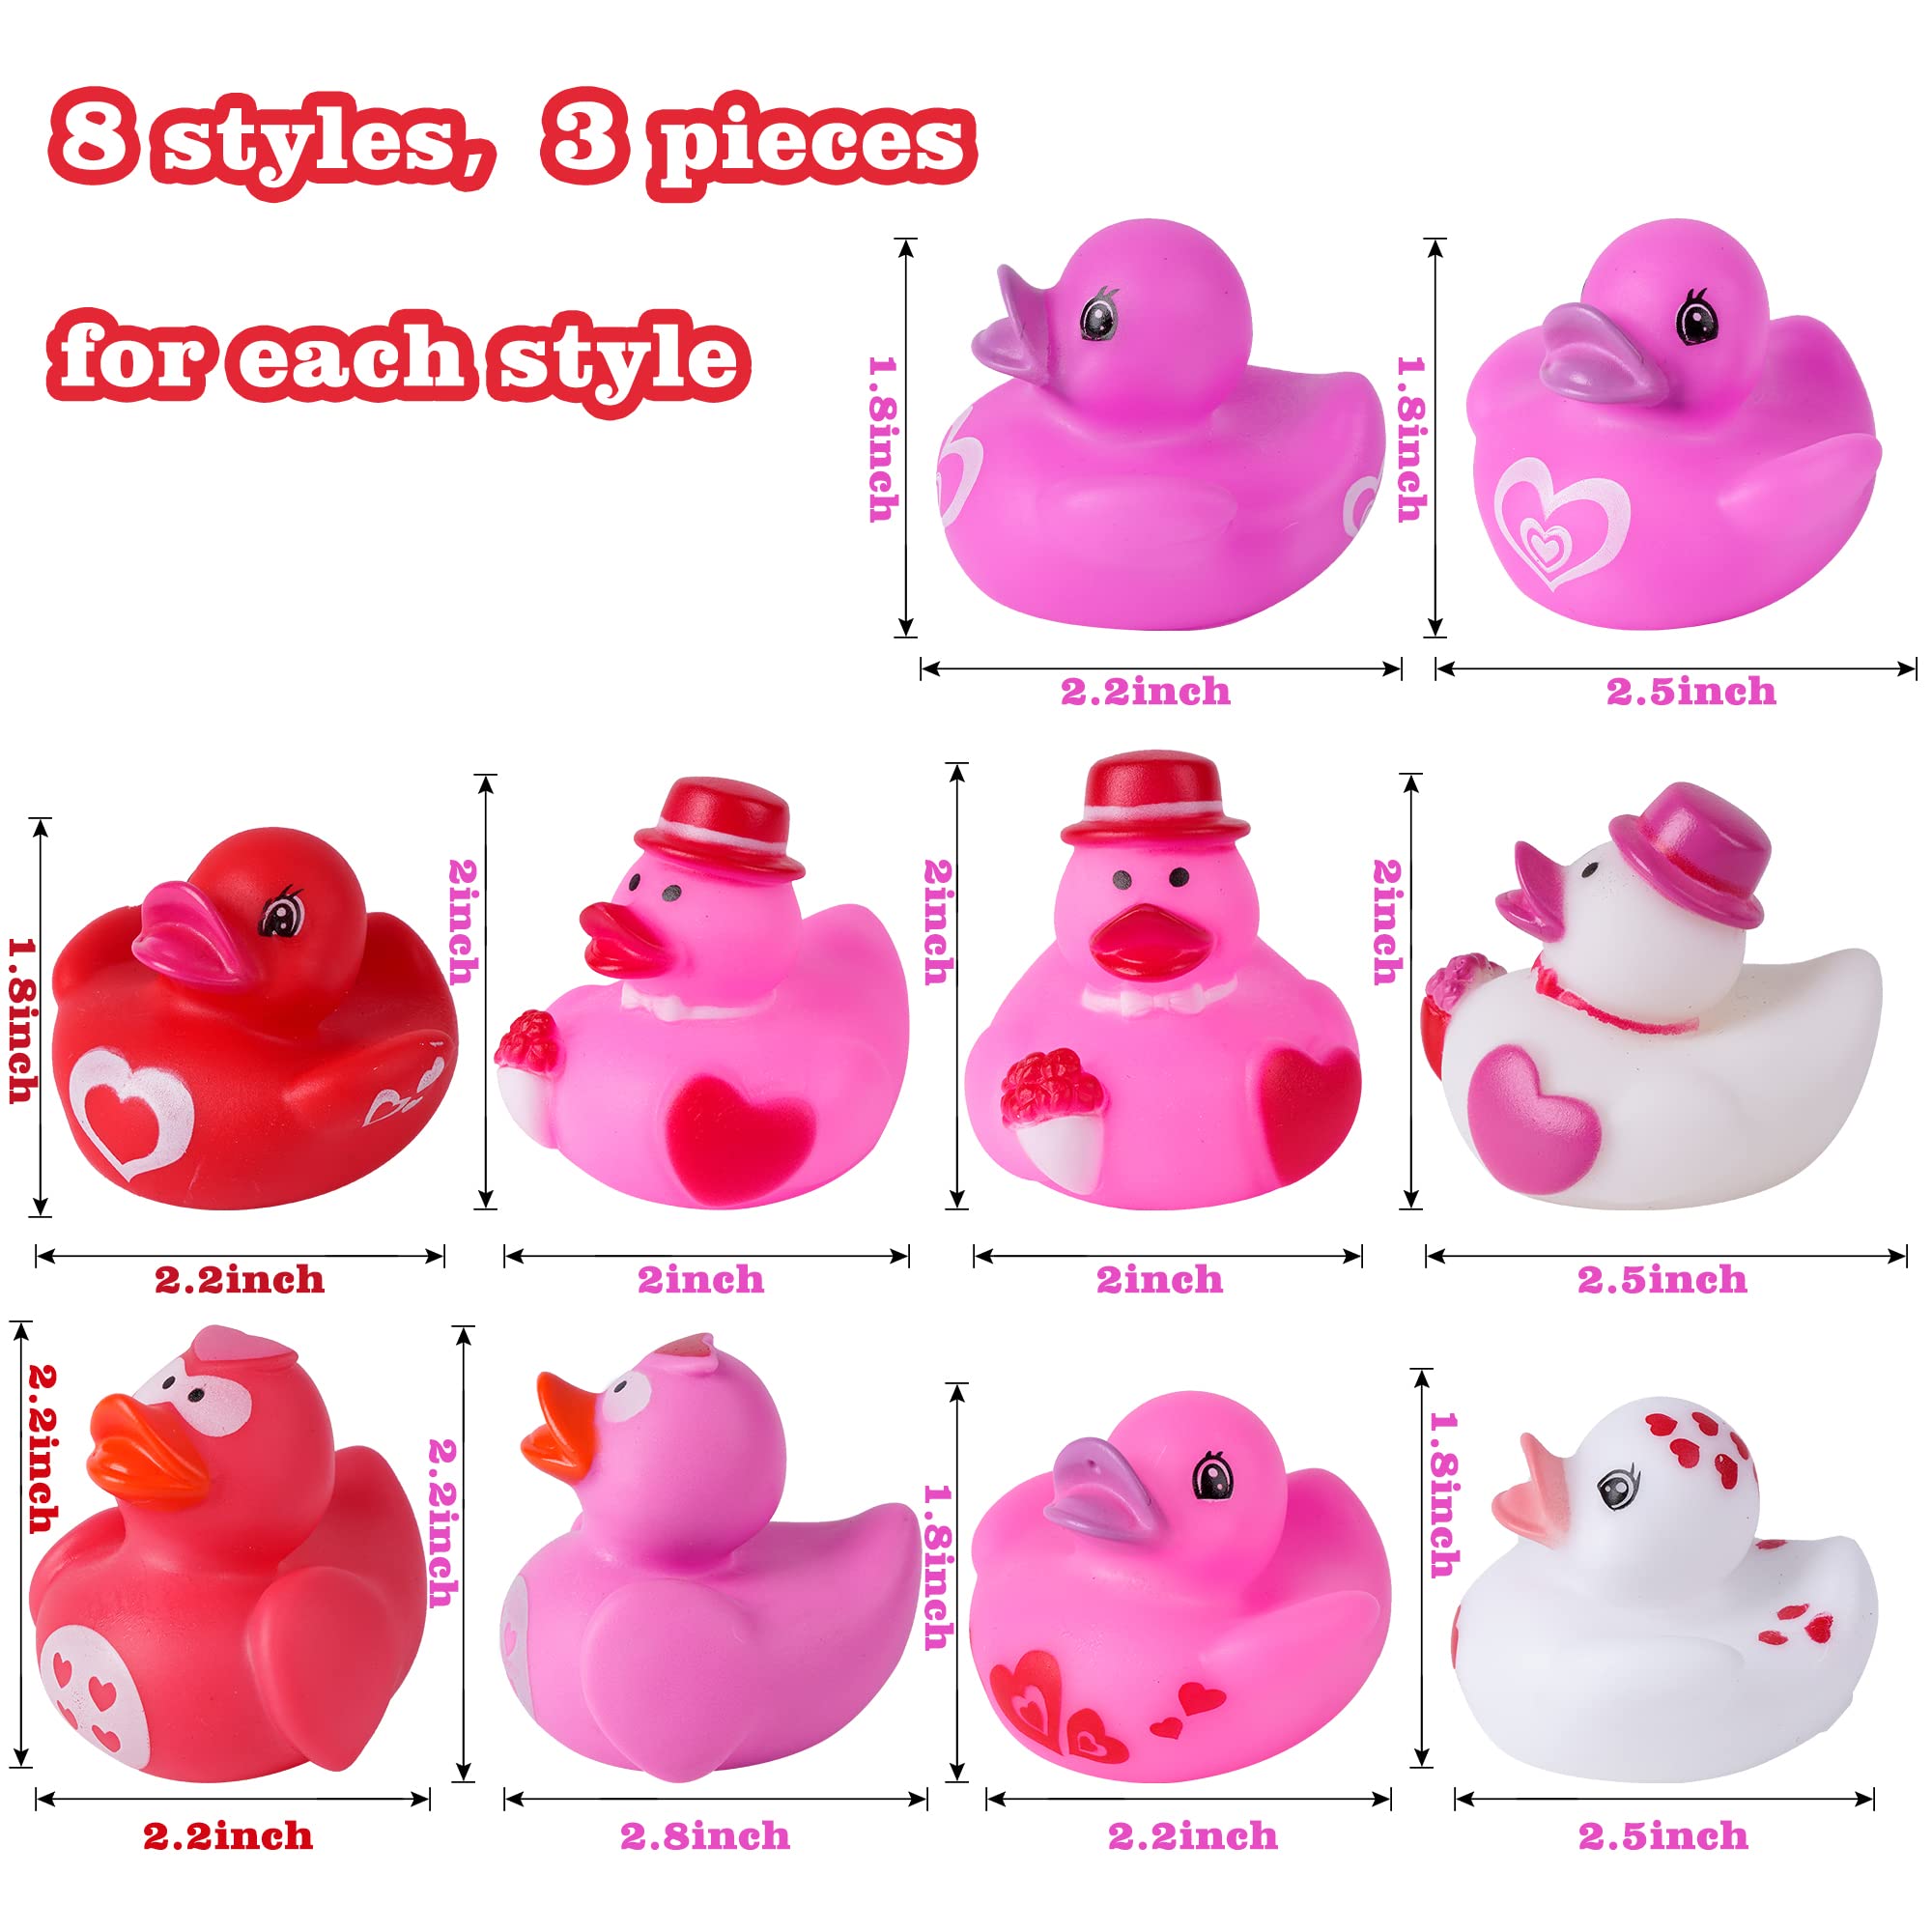 24 Pieces Valentine’s Day Rubber Ducks Novelty Mini Duckies Valentines Day Gifts for Kids Bulk,Valentines Party Favors, Giveaways Treats, Classroom Exchange Gifts